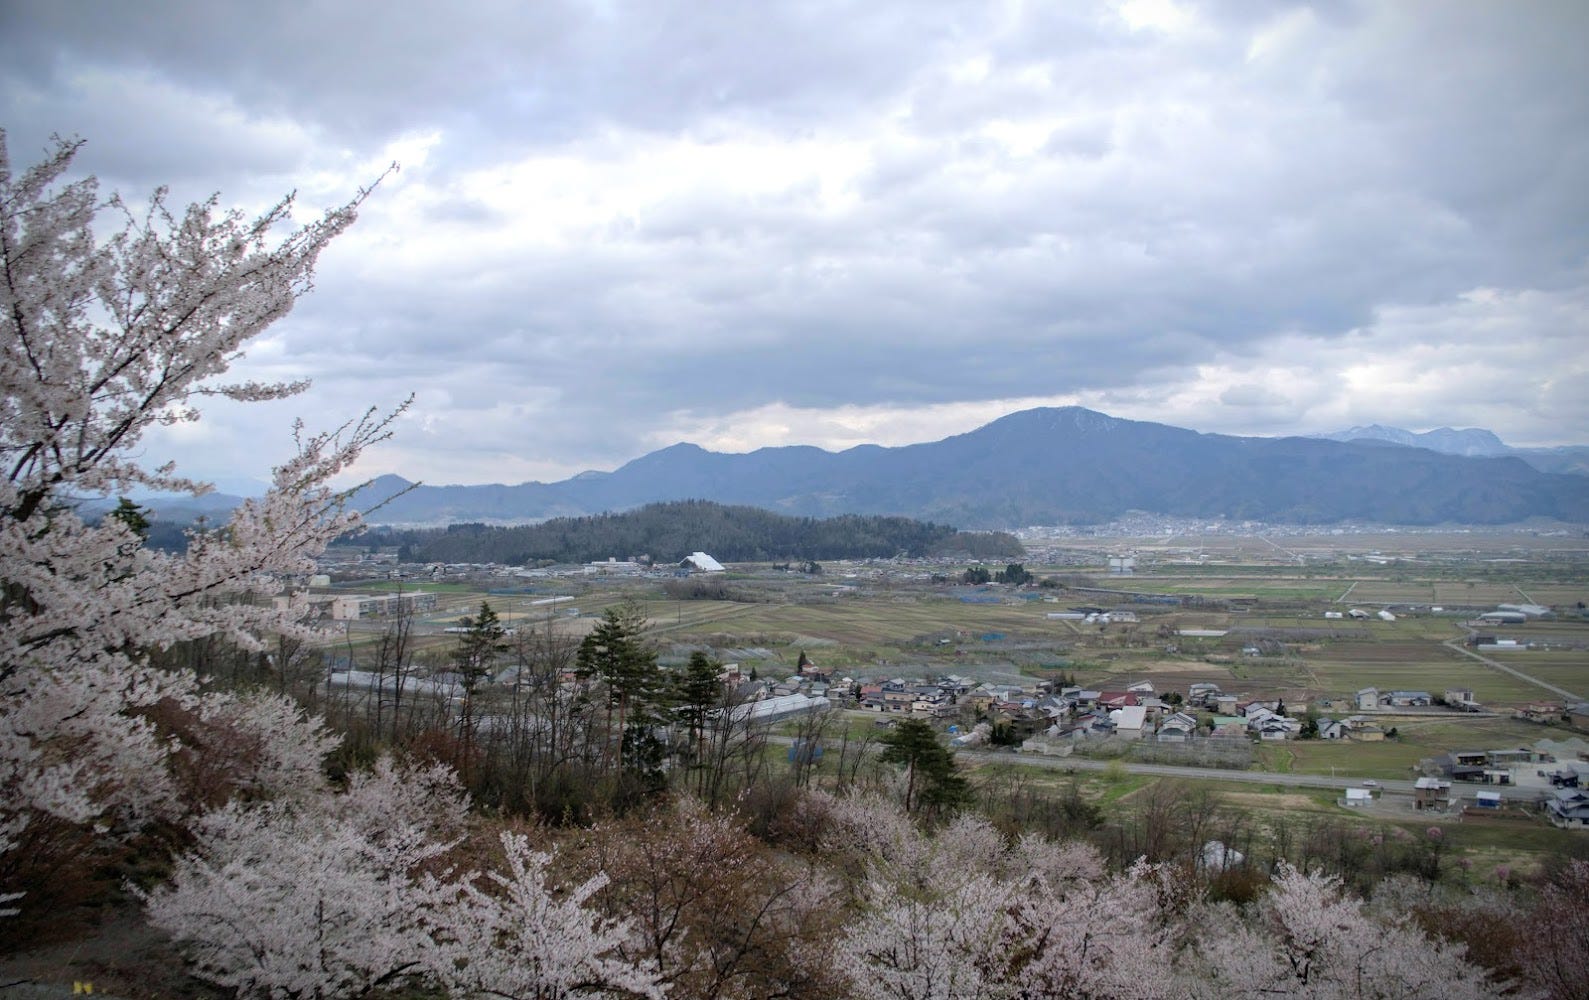 The view from Mt. Kitayama in Murayama City with Mt. Koshikidake and Mt. Okina in the background, and sakura in the foreground.